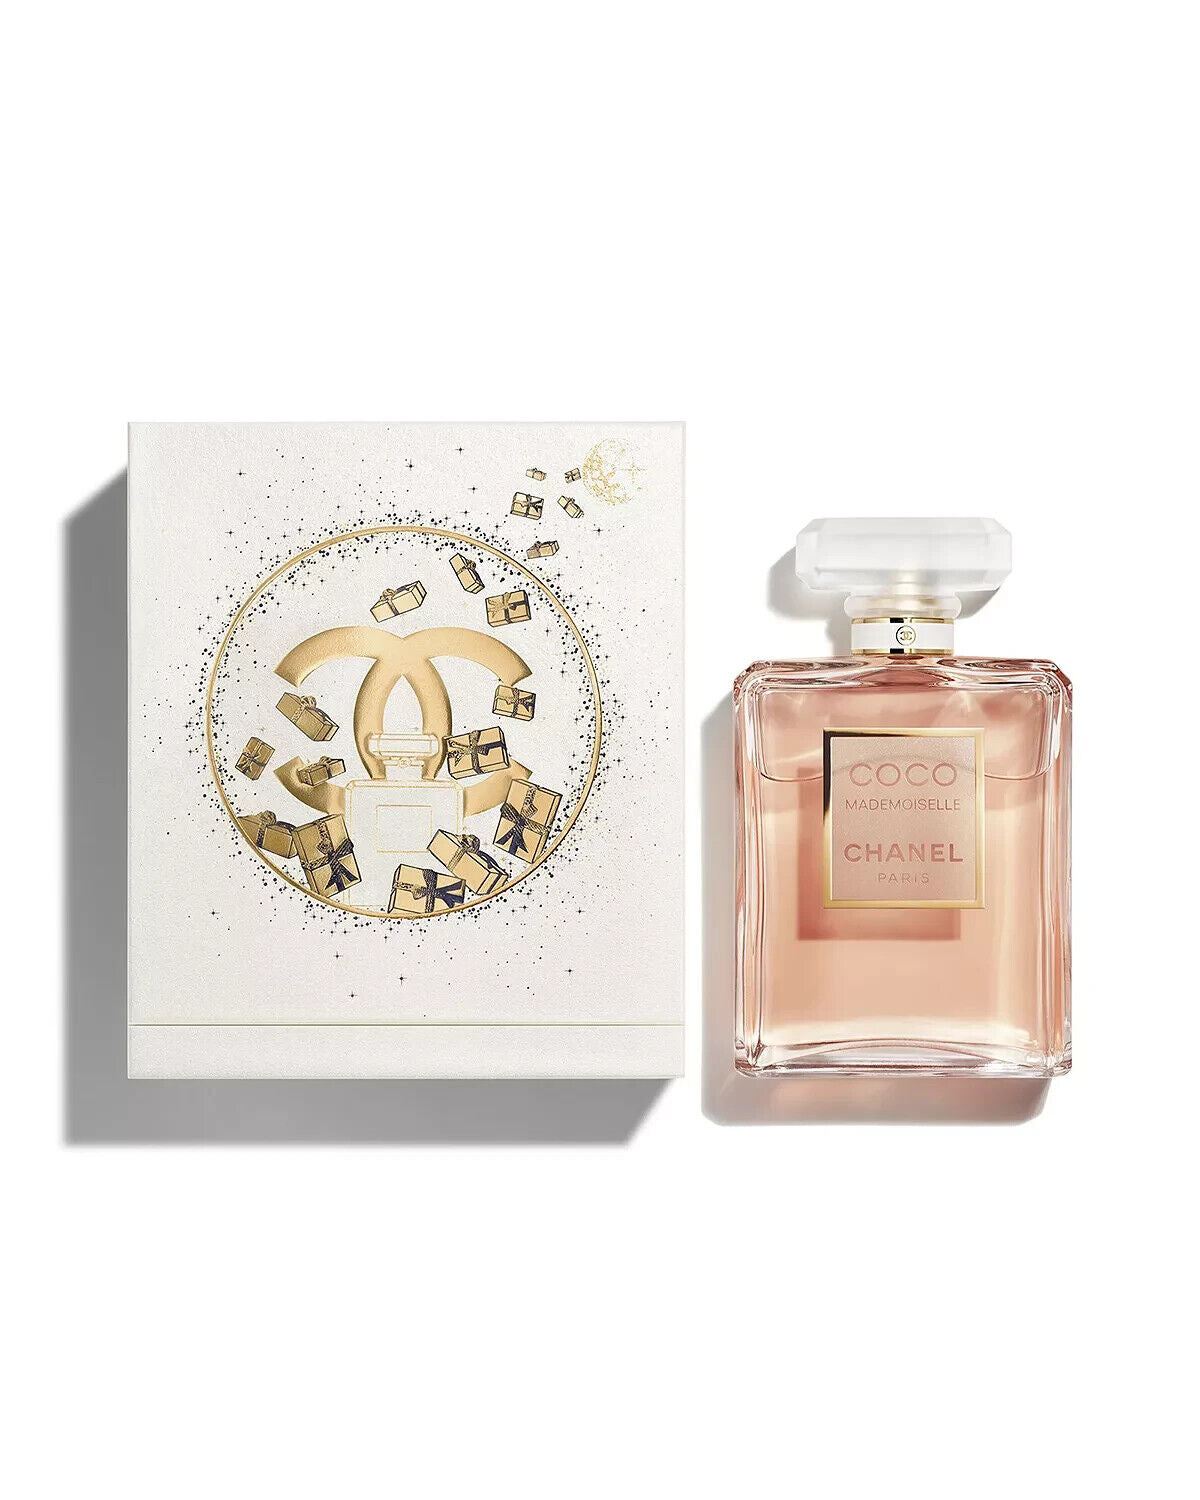 Chanel Coco Mademoiselle Limited Edition For Women EDP 100ml